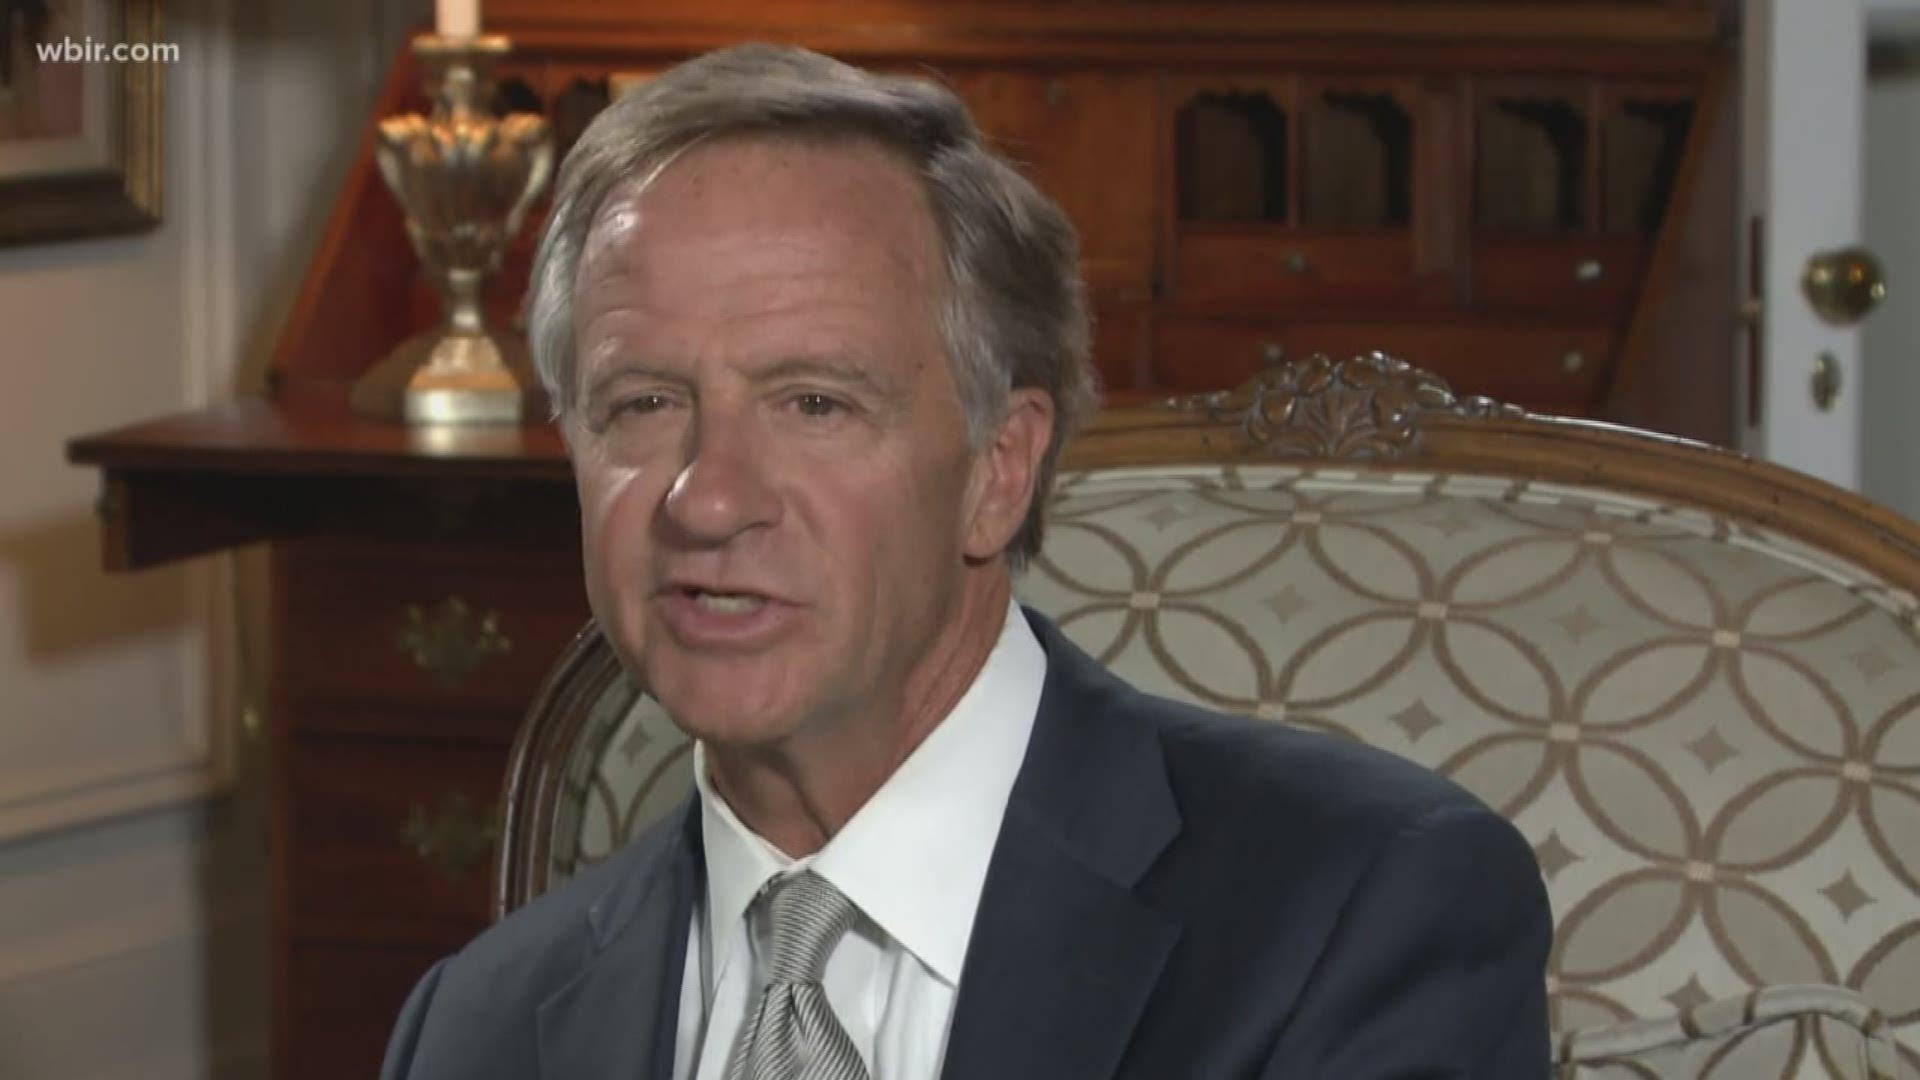 A magazine awarded Governor bill Haslam a top honor.